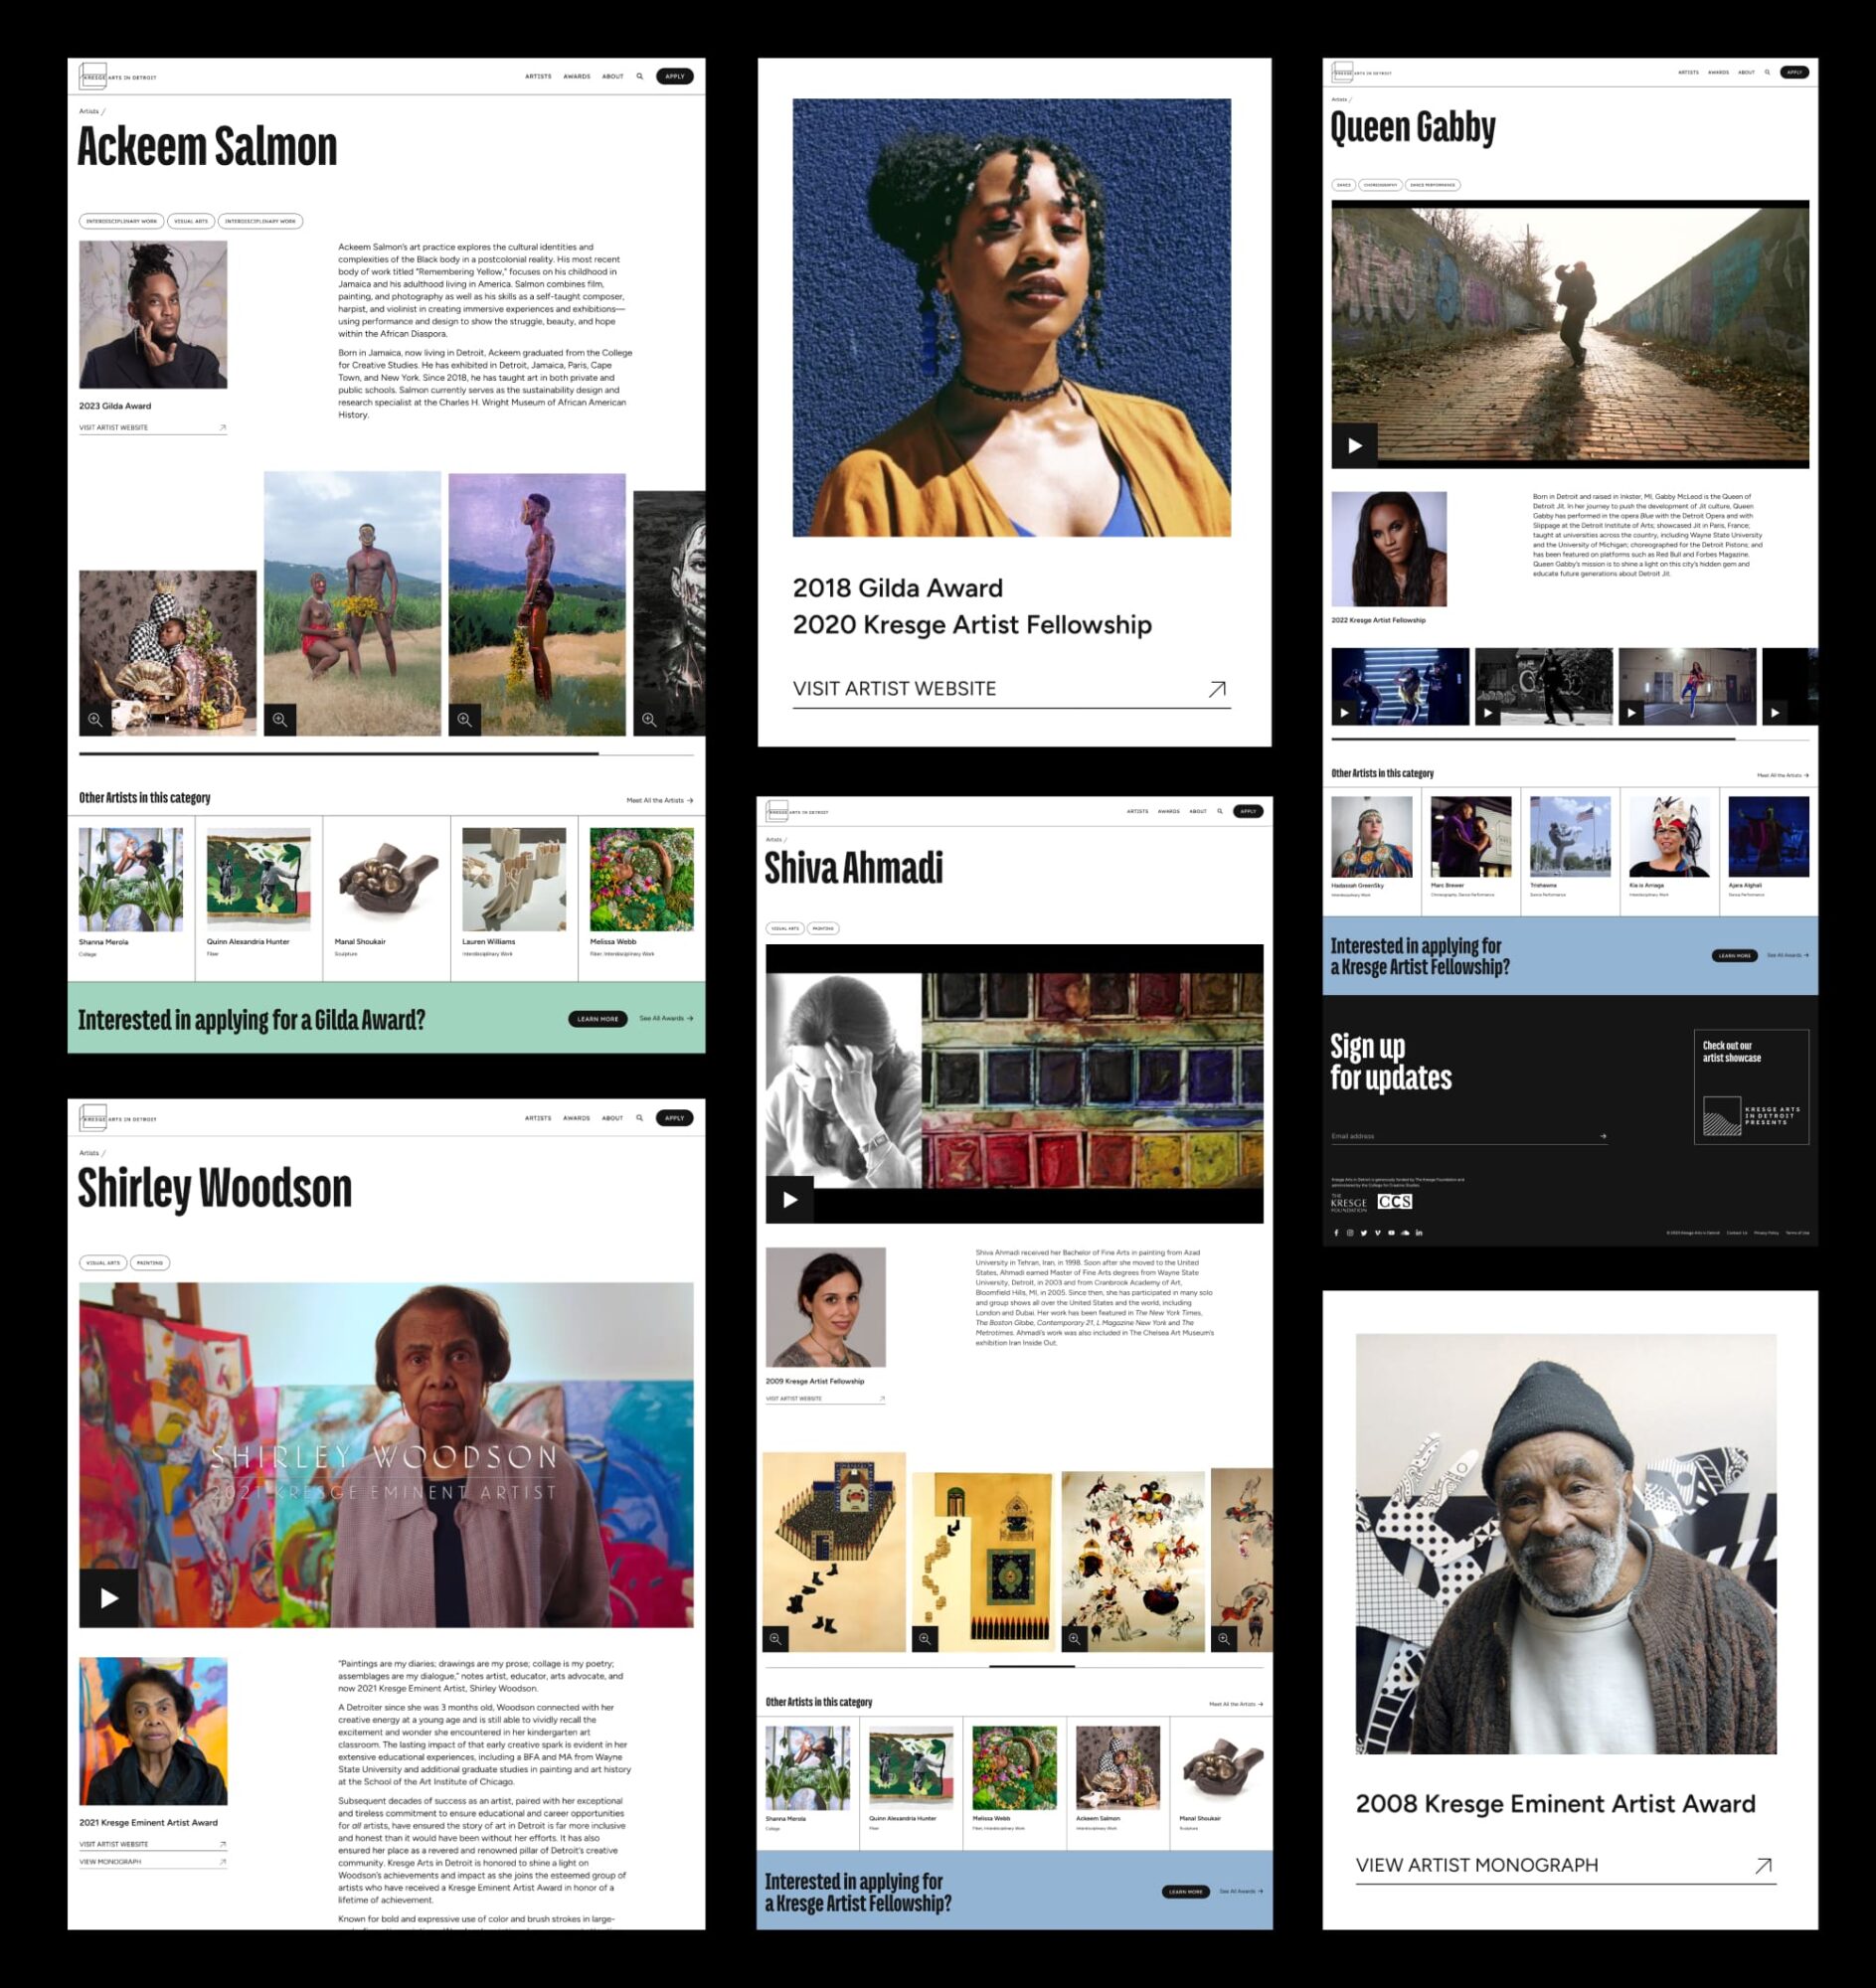 Collage showing various artist profile pages featured on the KAID website.